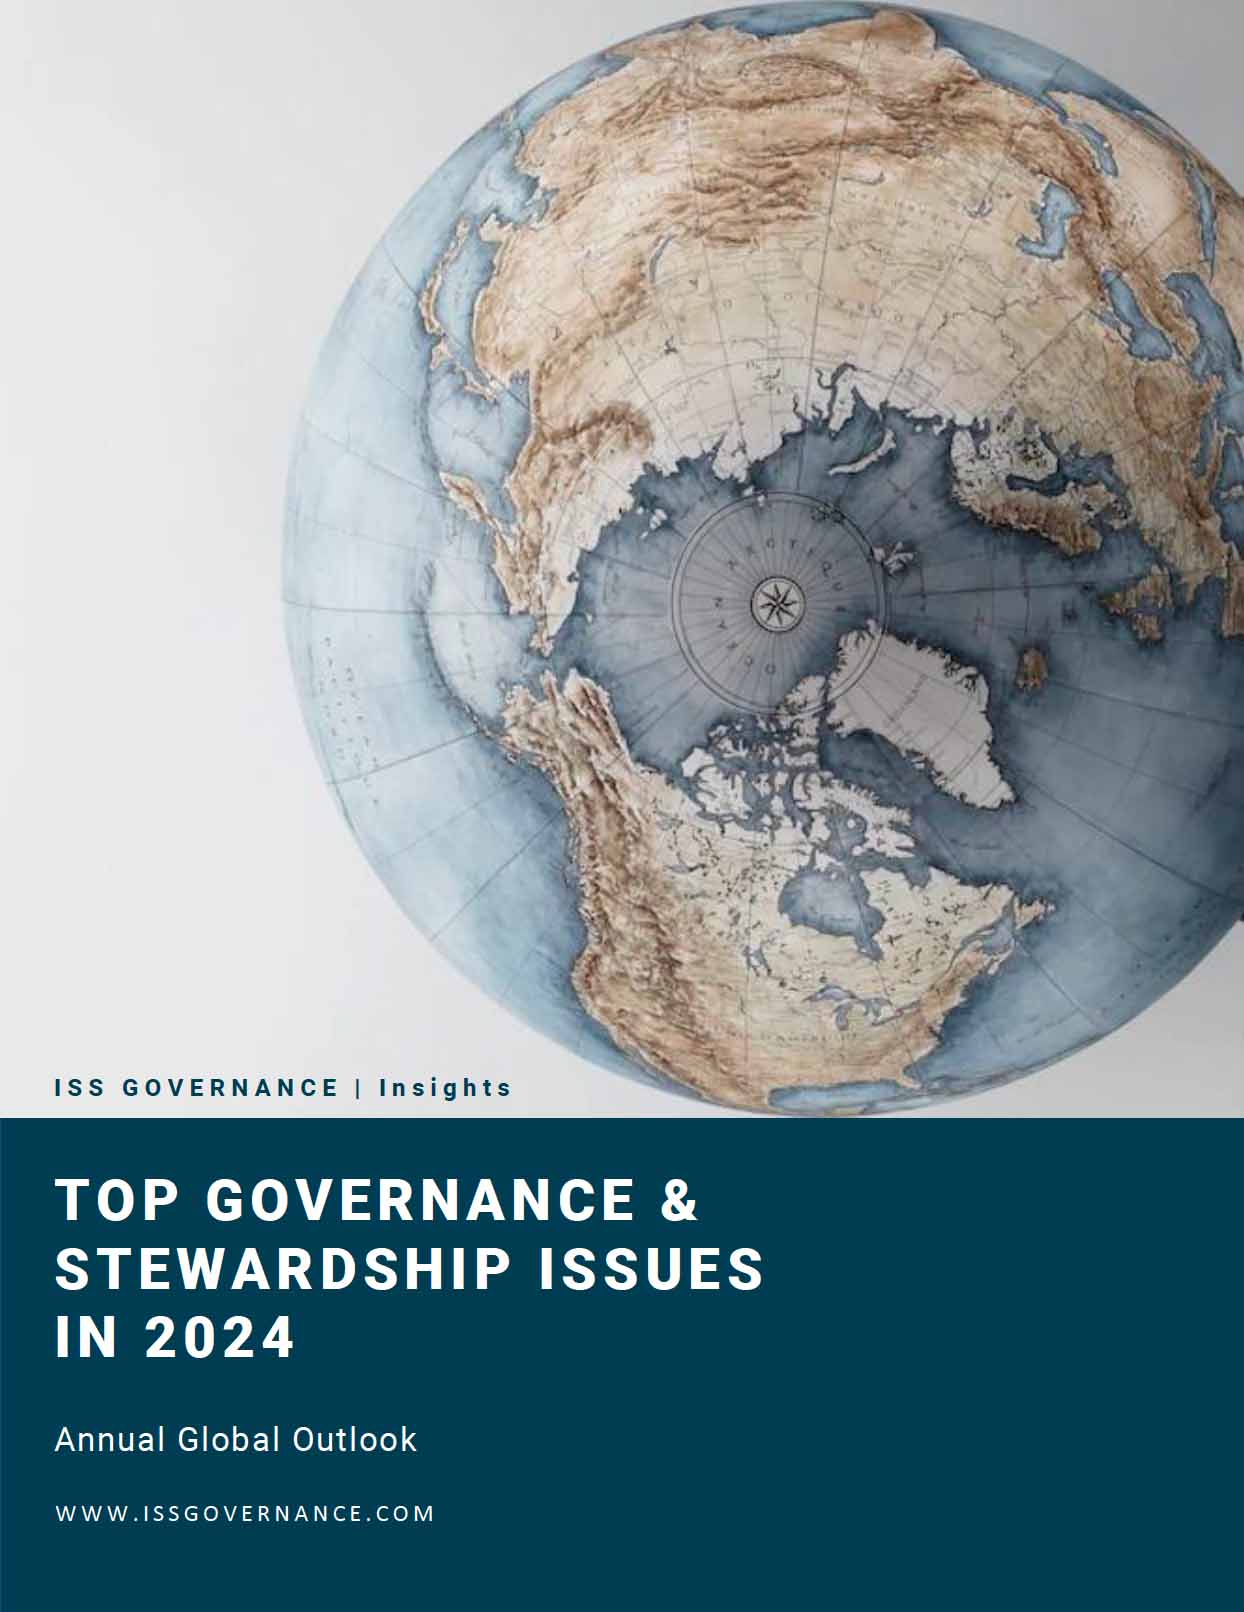 Top Governance and Stewardship Issues in 2024